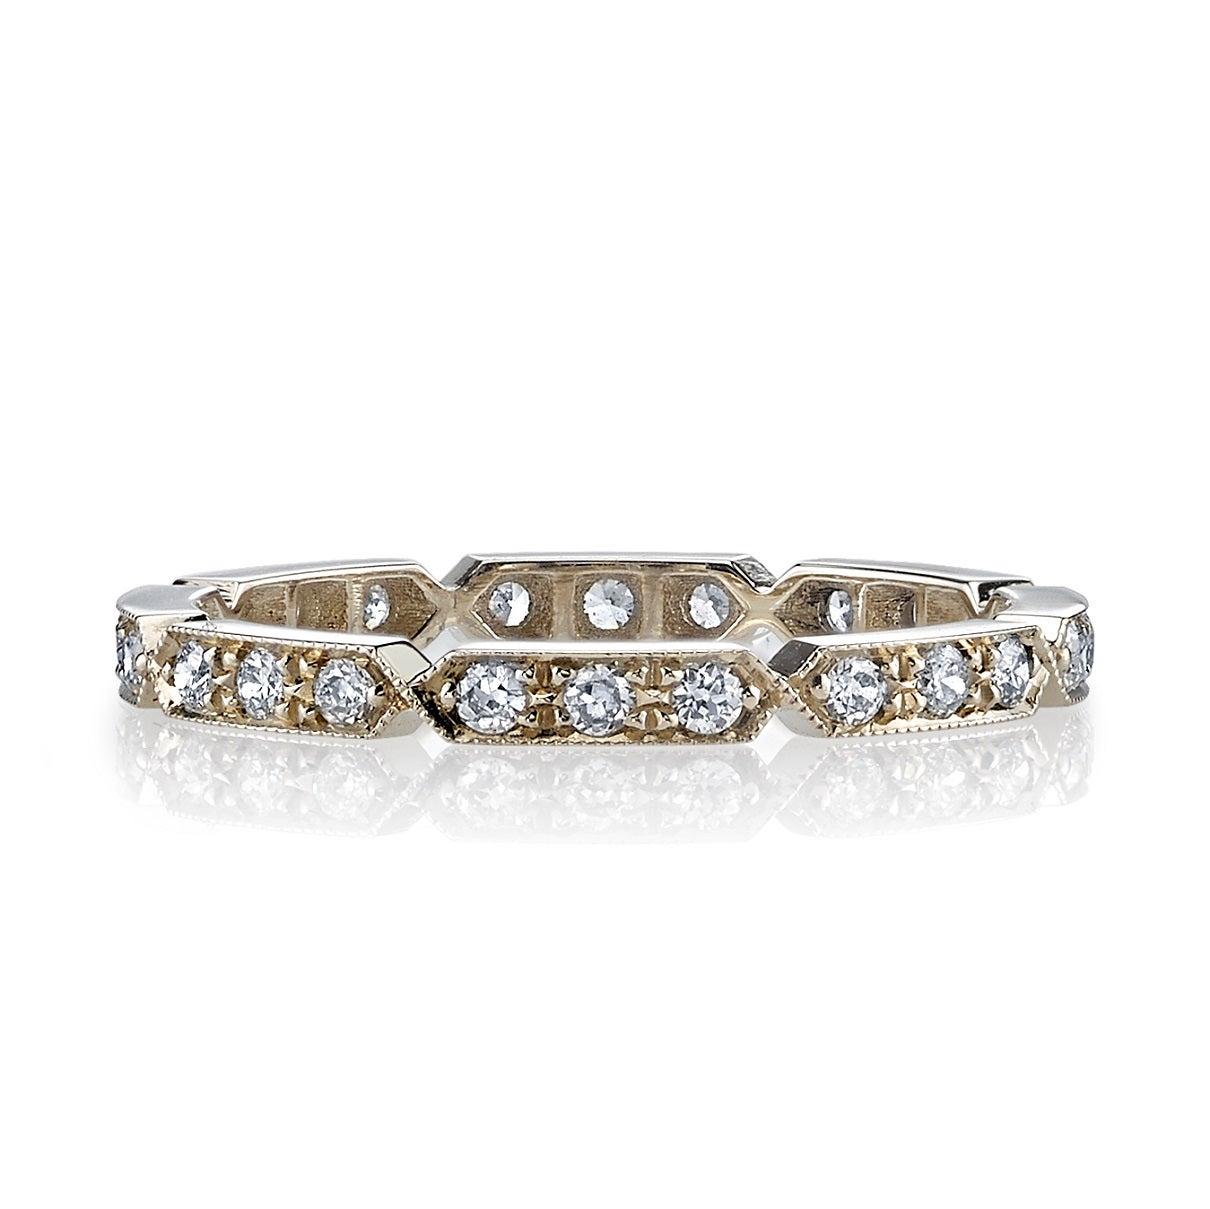 For Sale:  Handcrafted Carly Old European Cut Diamond Eternity Band by Single Stone 4